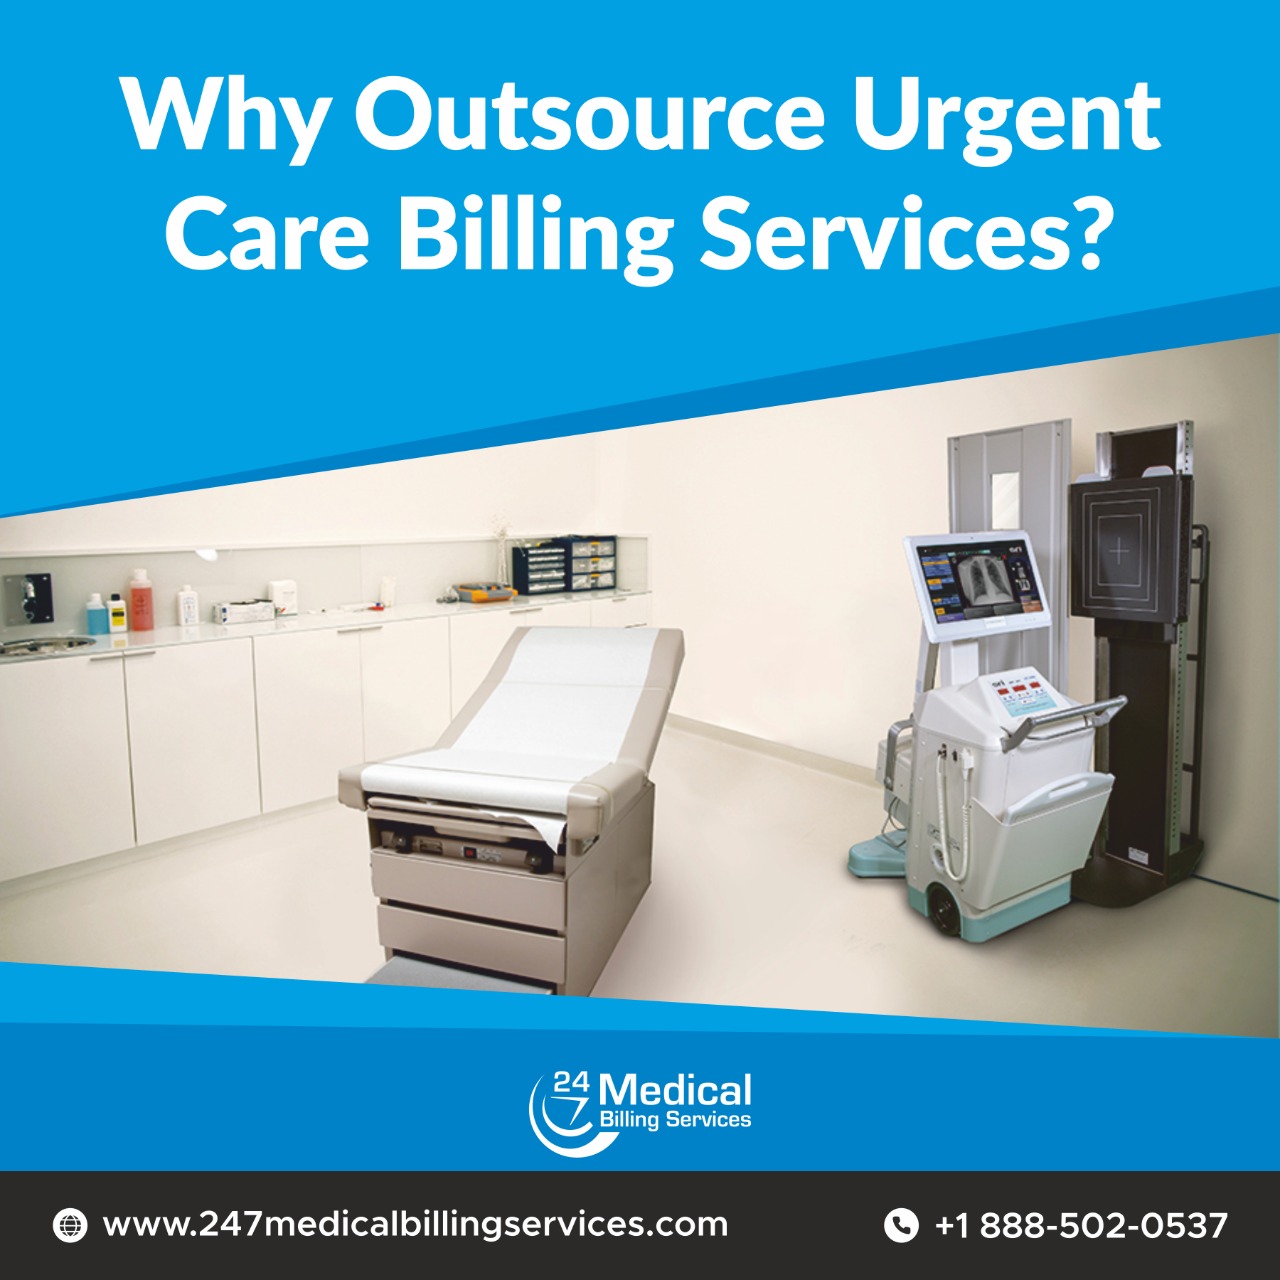  Why Outsource Urgent Care Billing Services?